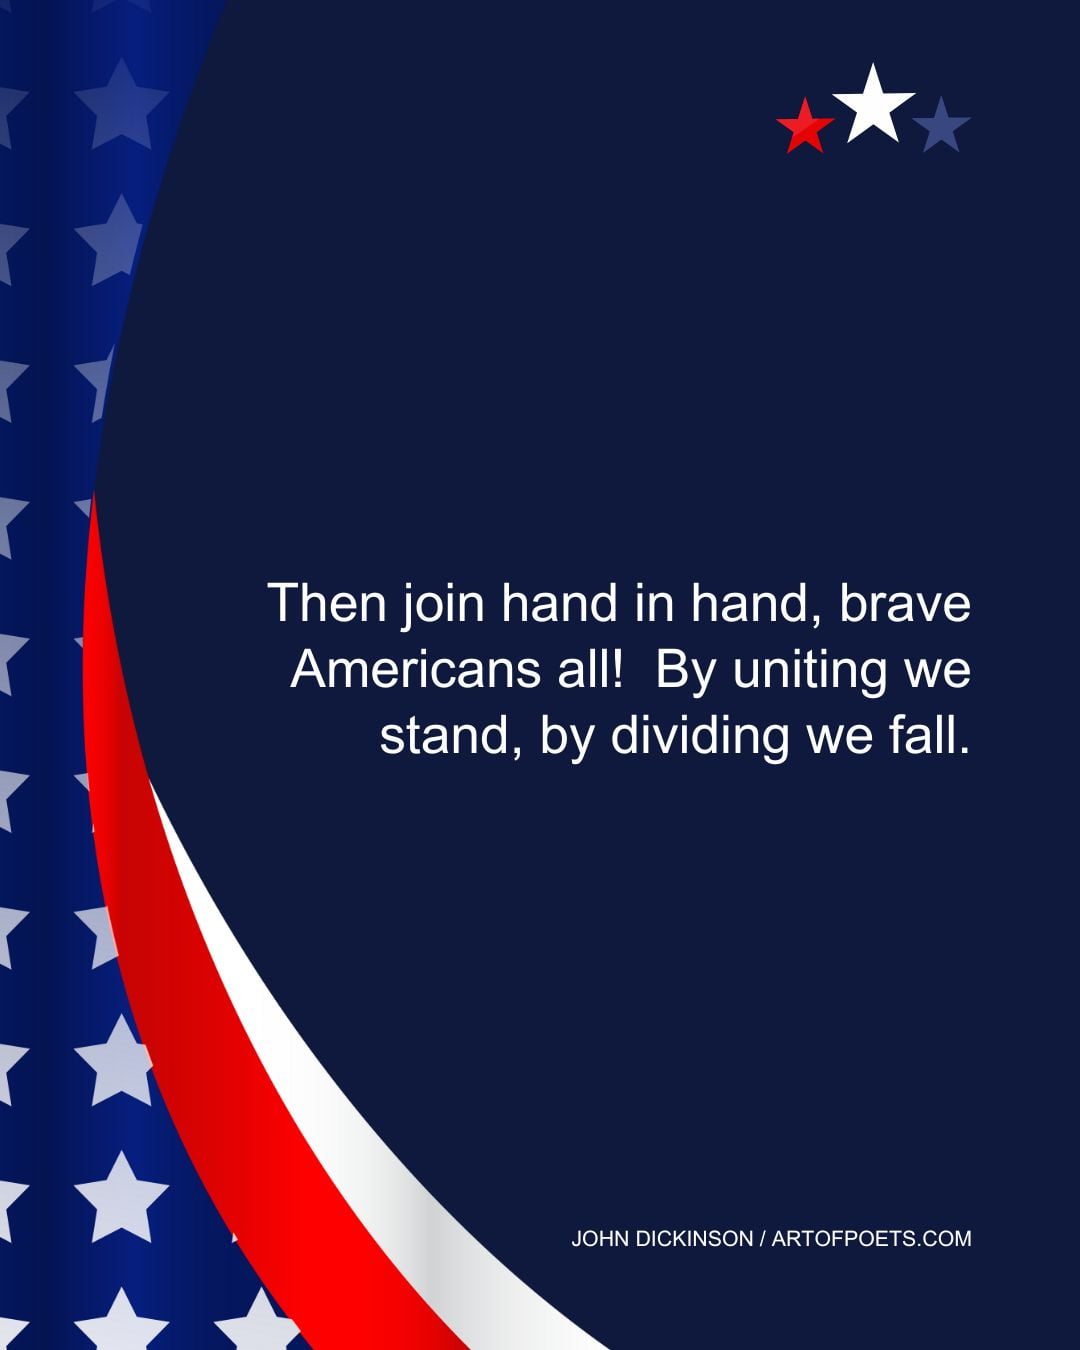 Then join hand in hand brave Americans all By uniting we stand by dividing we fall